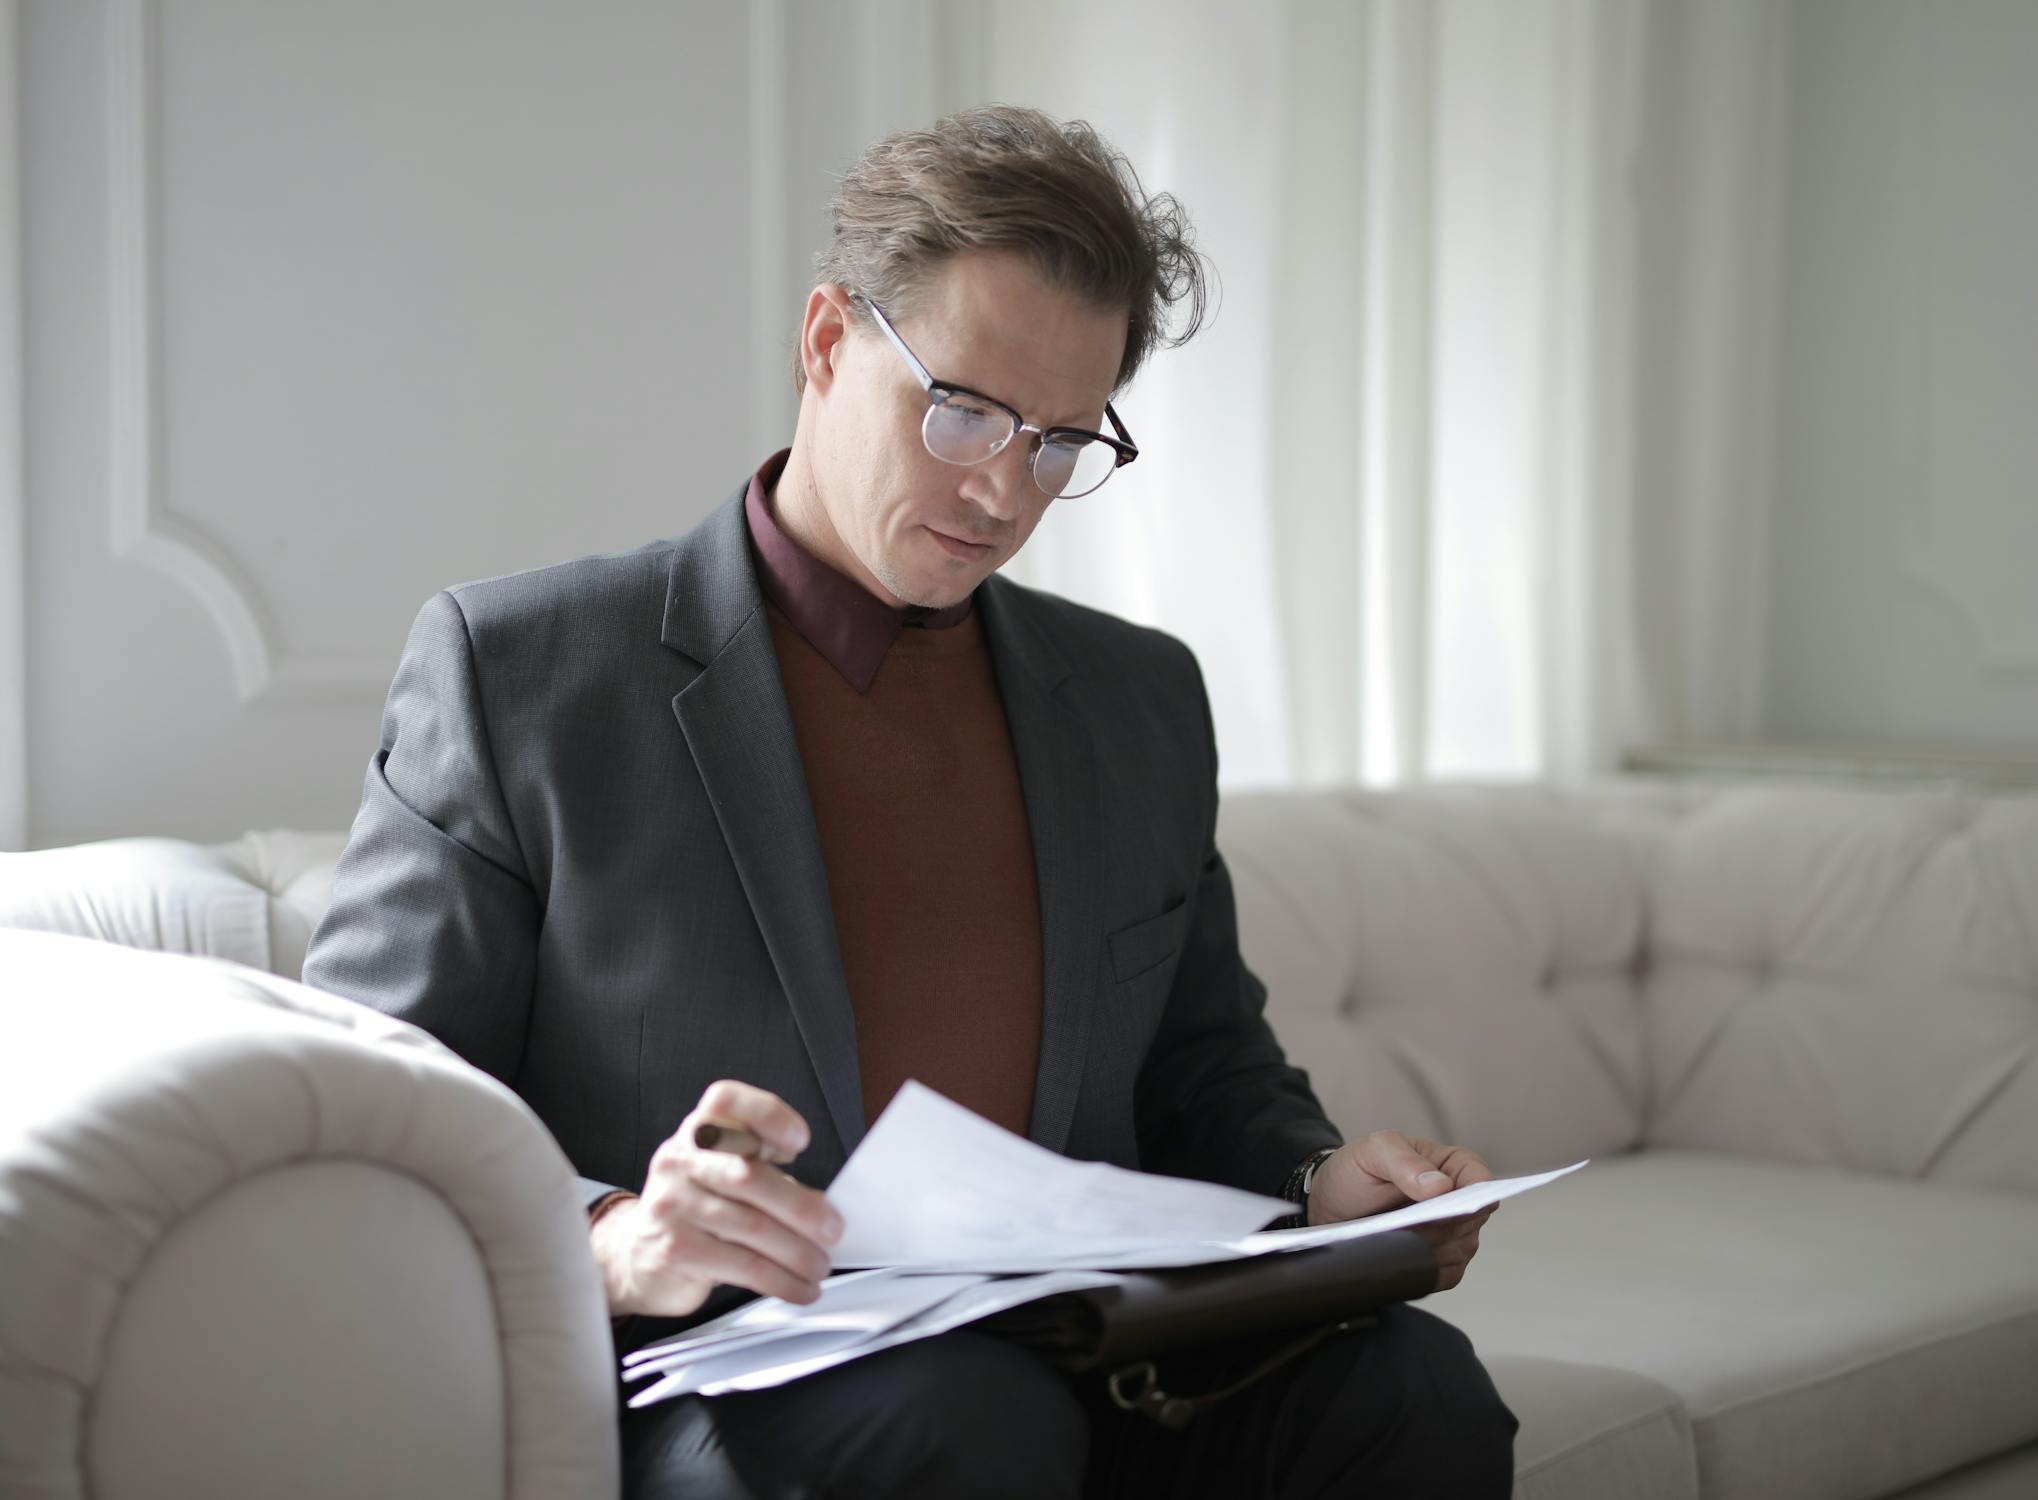 A diligent personal injury lawyer carefully reviewing legal documents in a focused manner